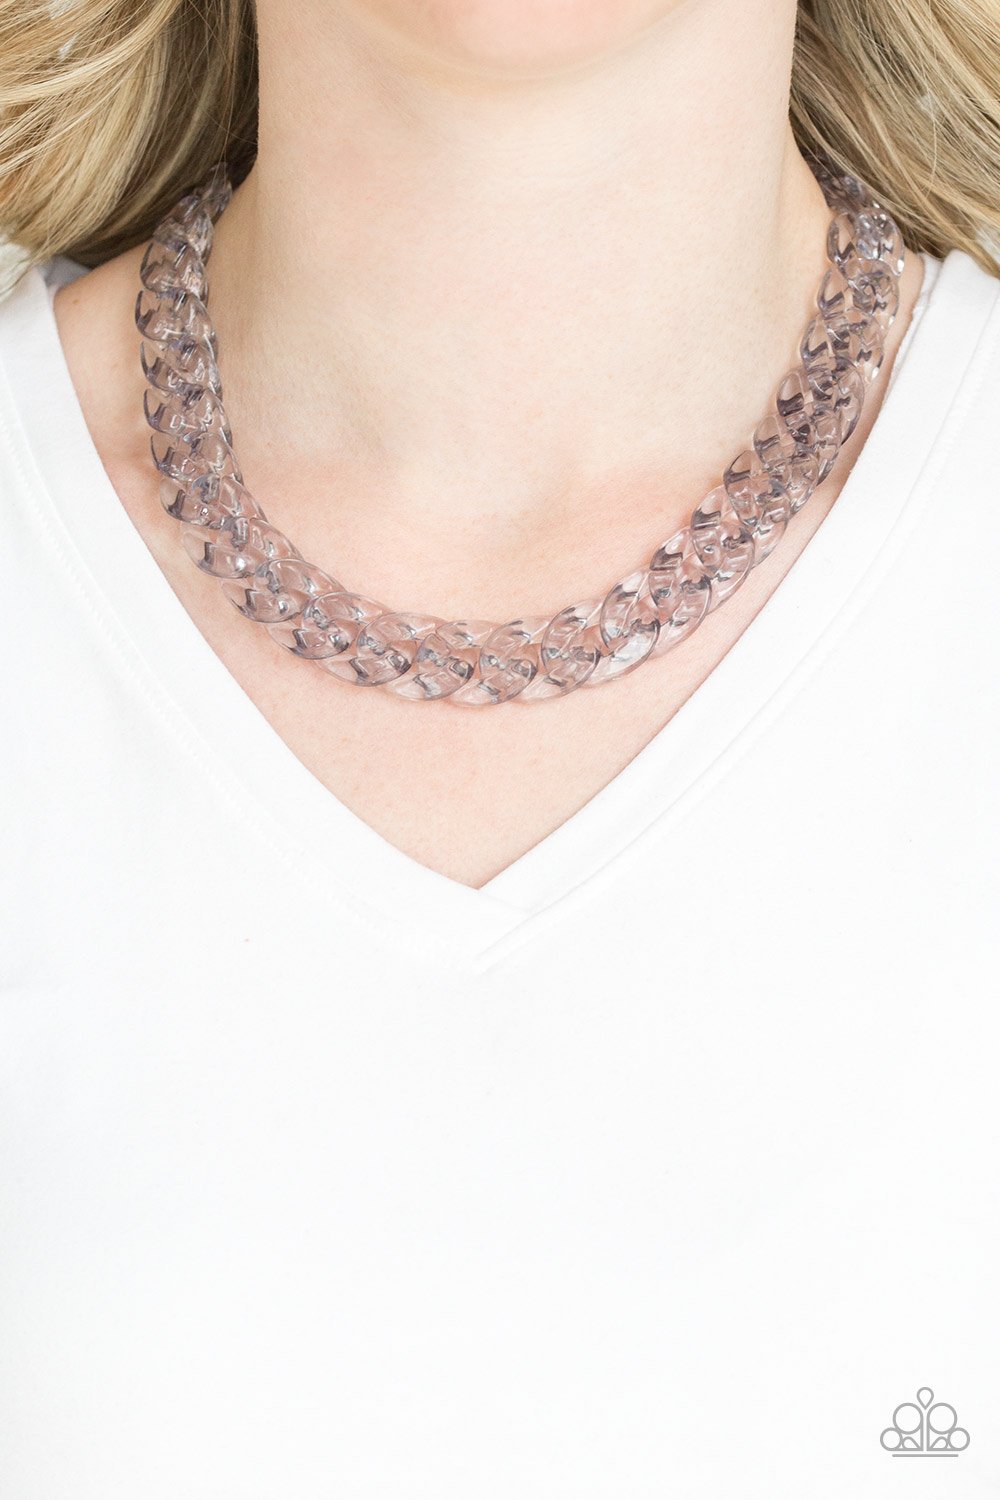 Put It On Ice - silver - Paparazzi necklace